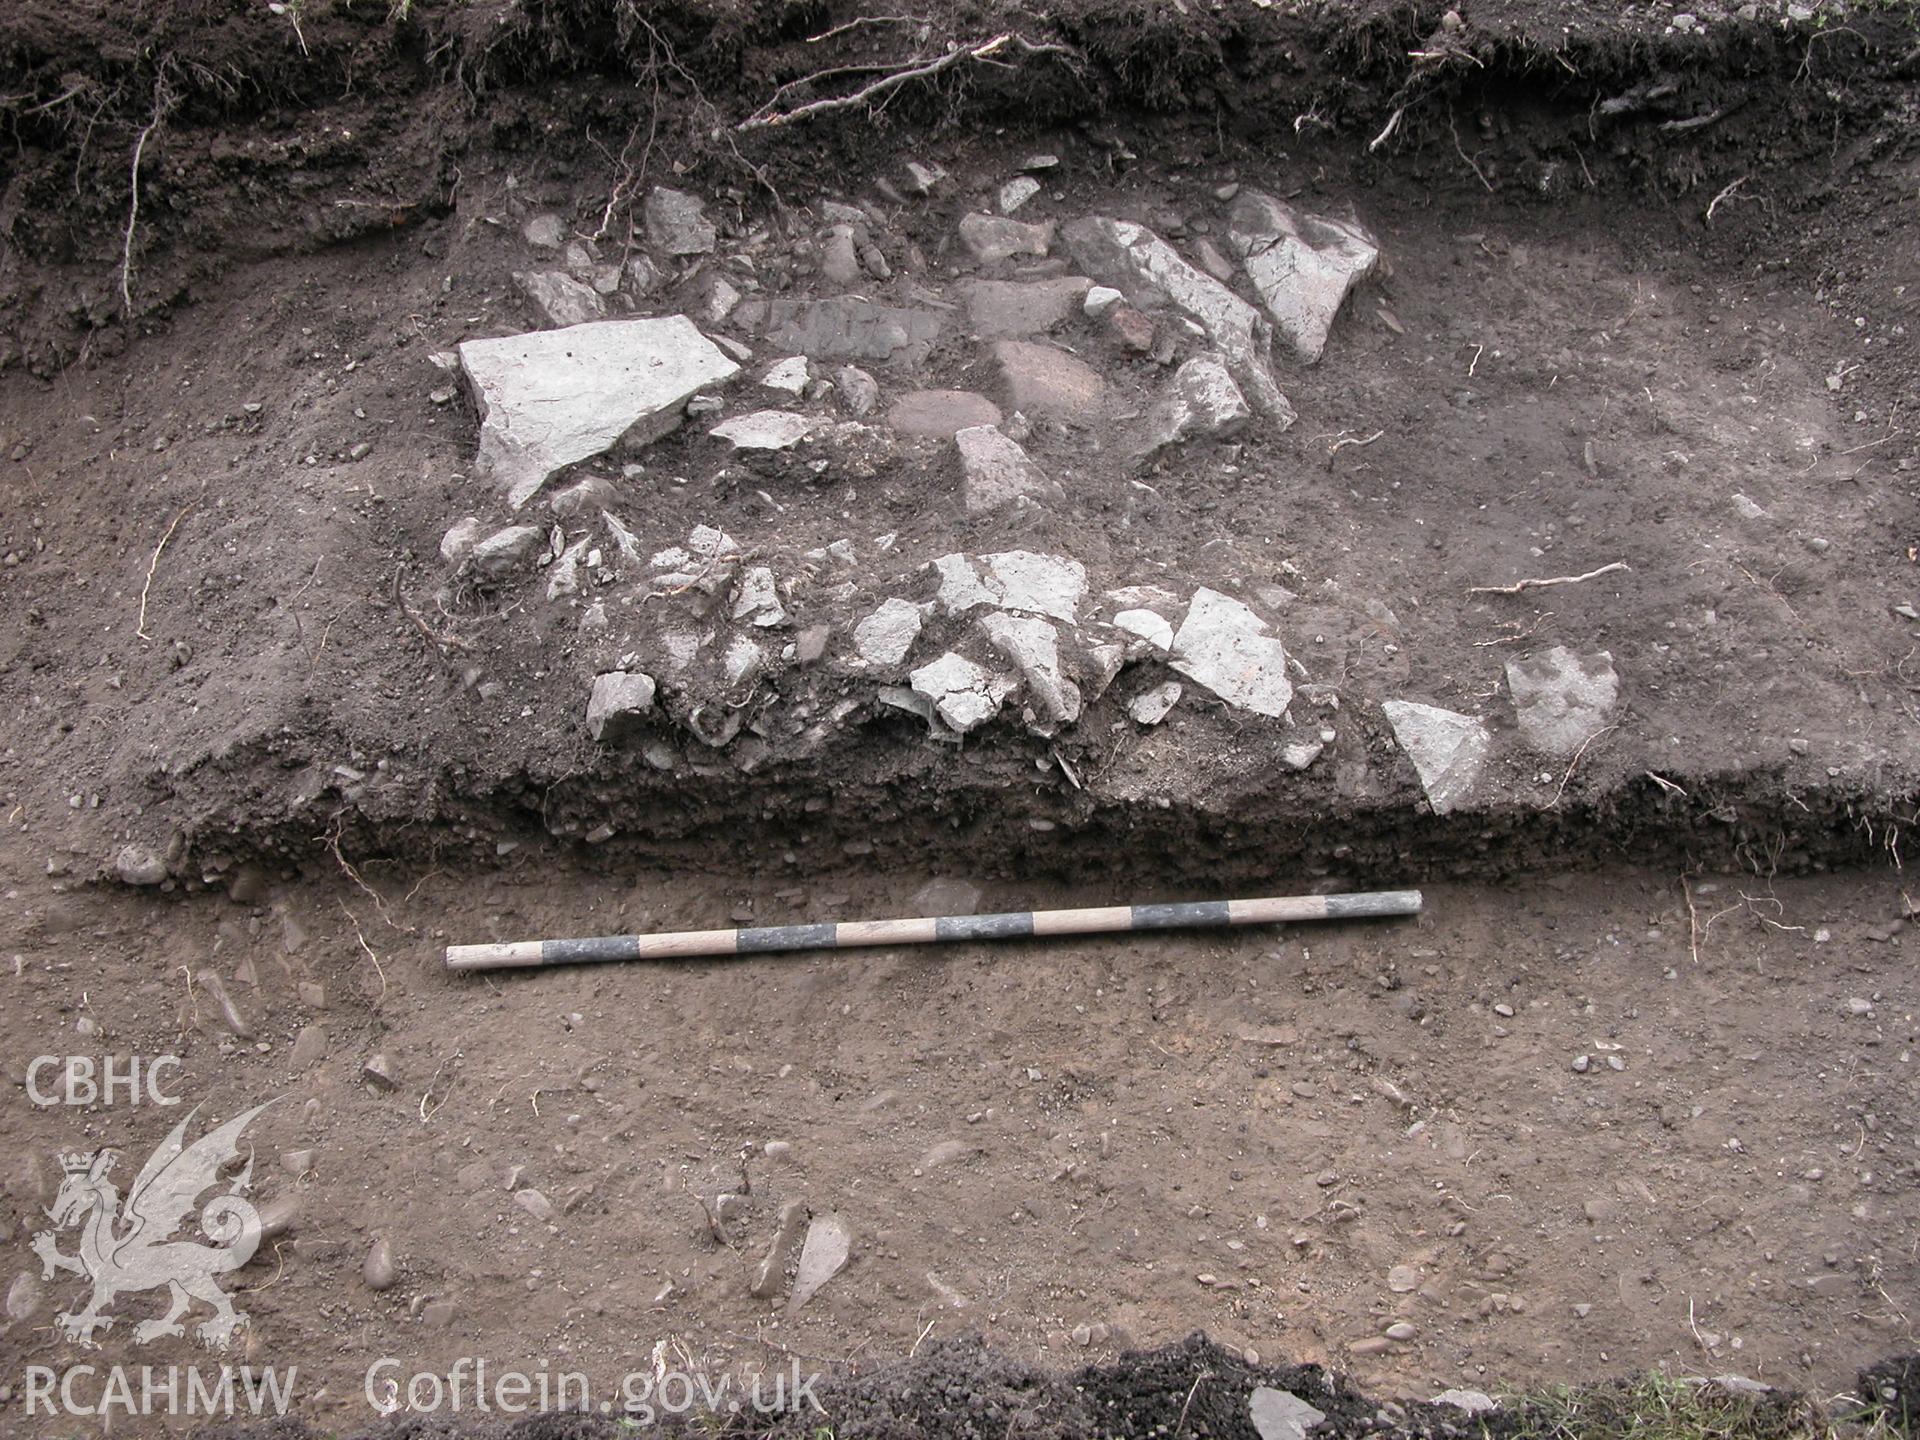 Uncaptioned digital photograph showing trench, taken as part of Archaeological Watching Brief and Desk Based Assessment for the Old Bowling Green, Cannons Lane, Presteigne. CAP Report Number 653.